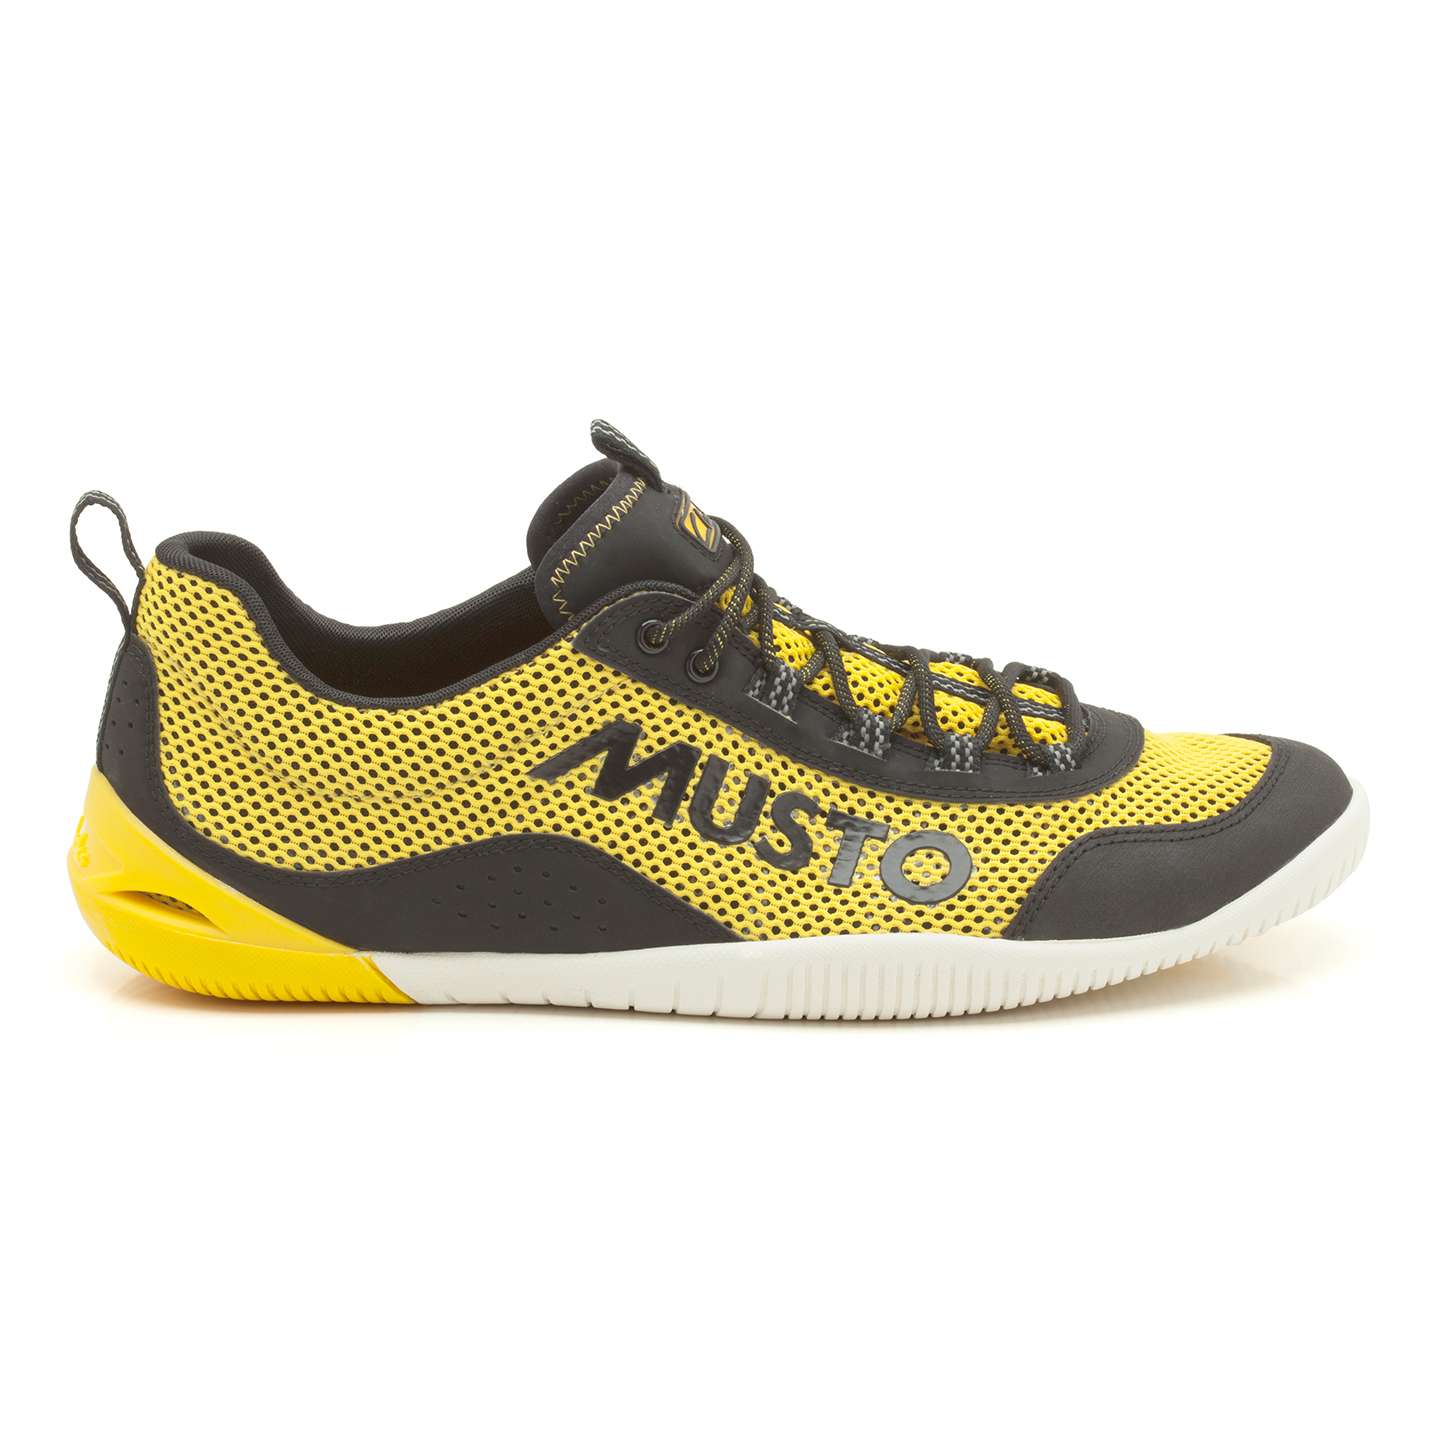 clarks musto trainers